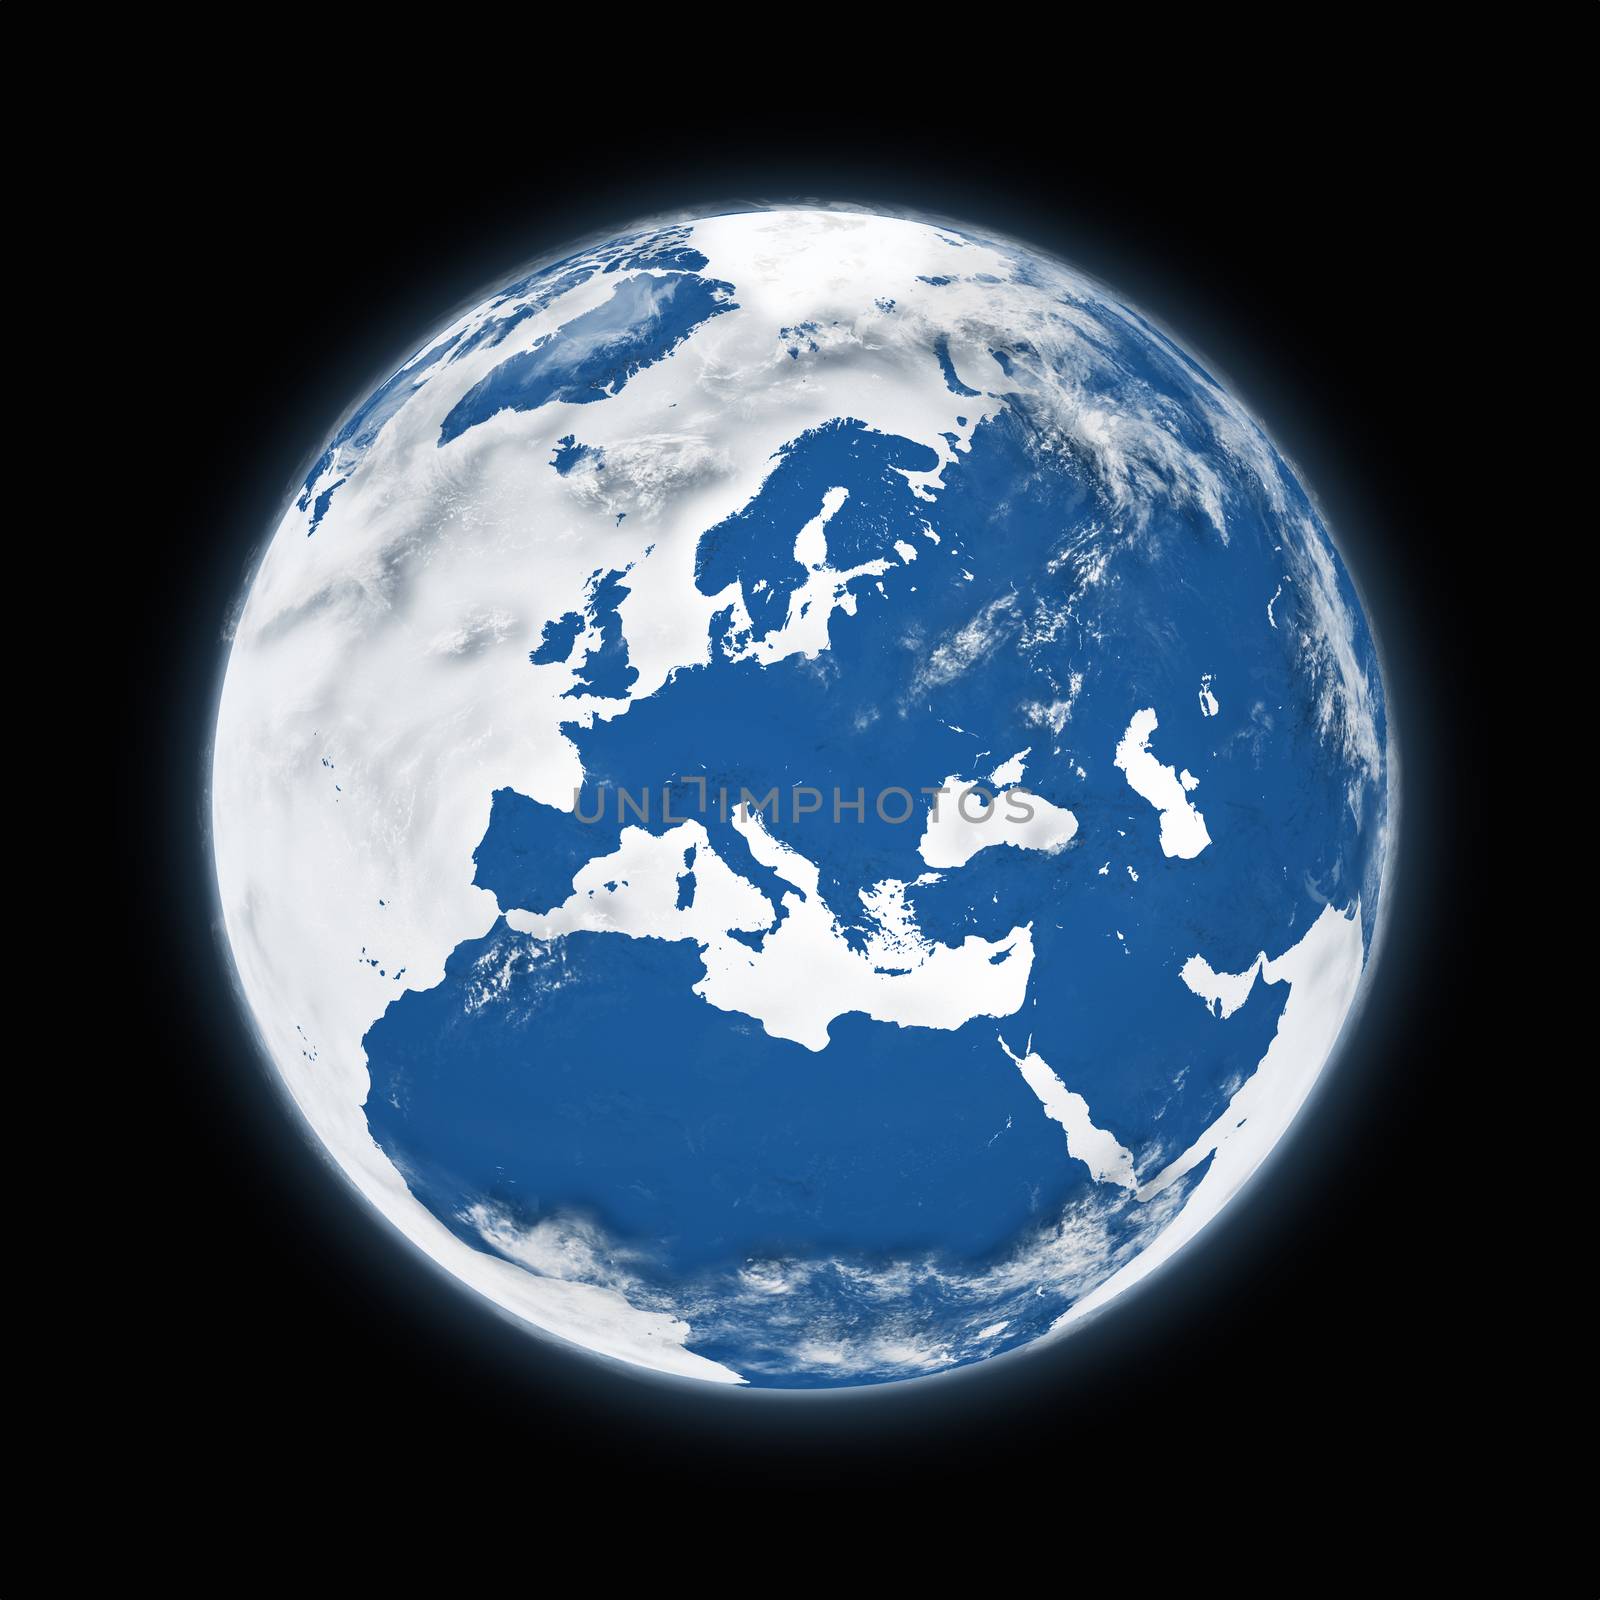 Europe on blue planet Earth isolated on black background. Highly detailed planet surface. Elements of this image furnished by NASA.